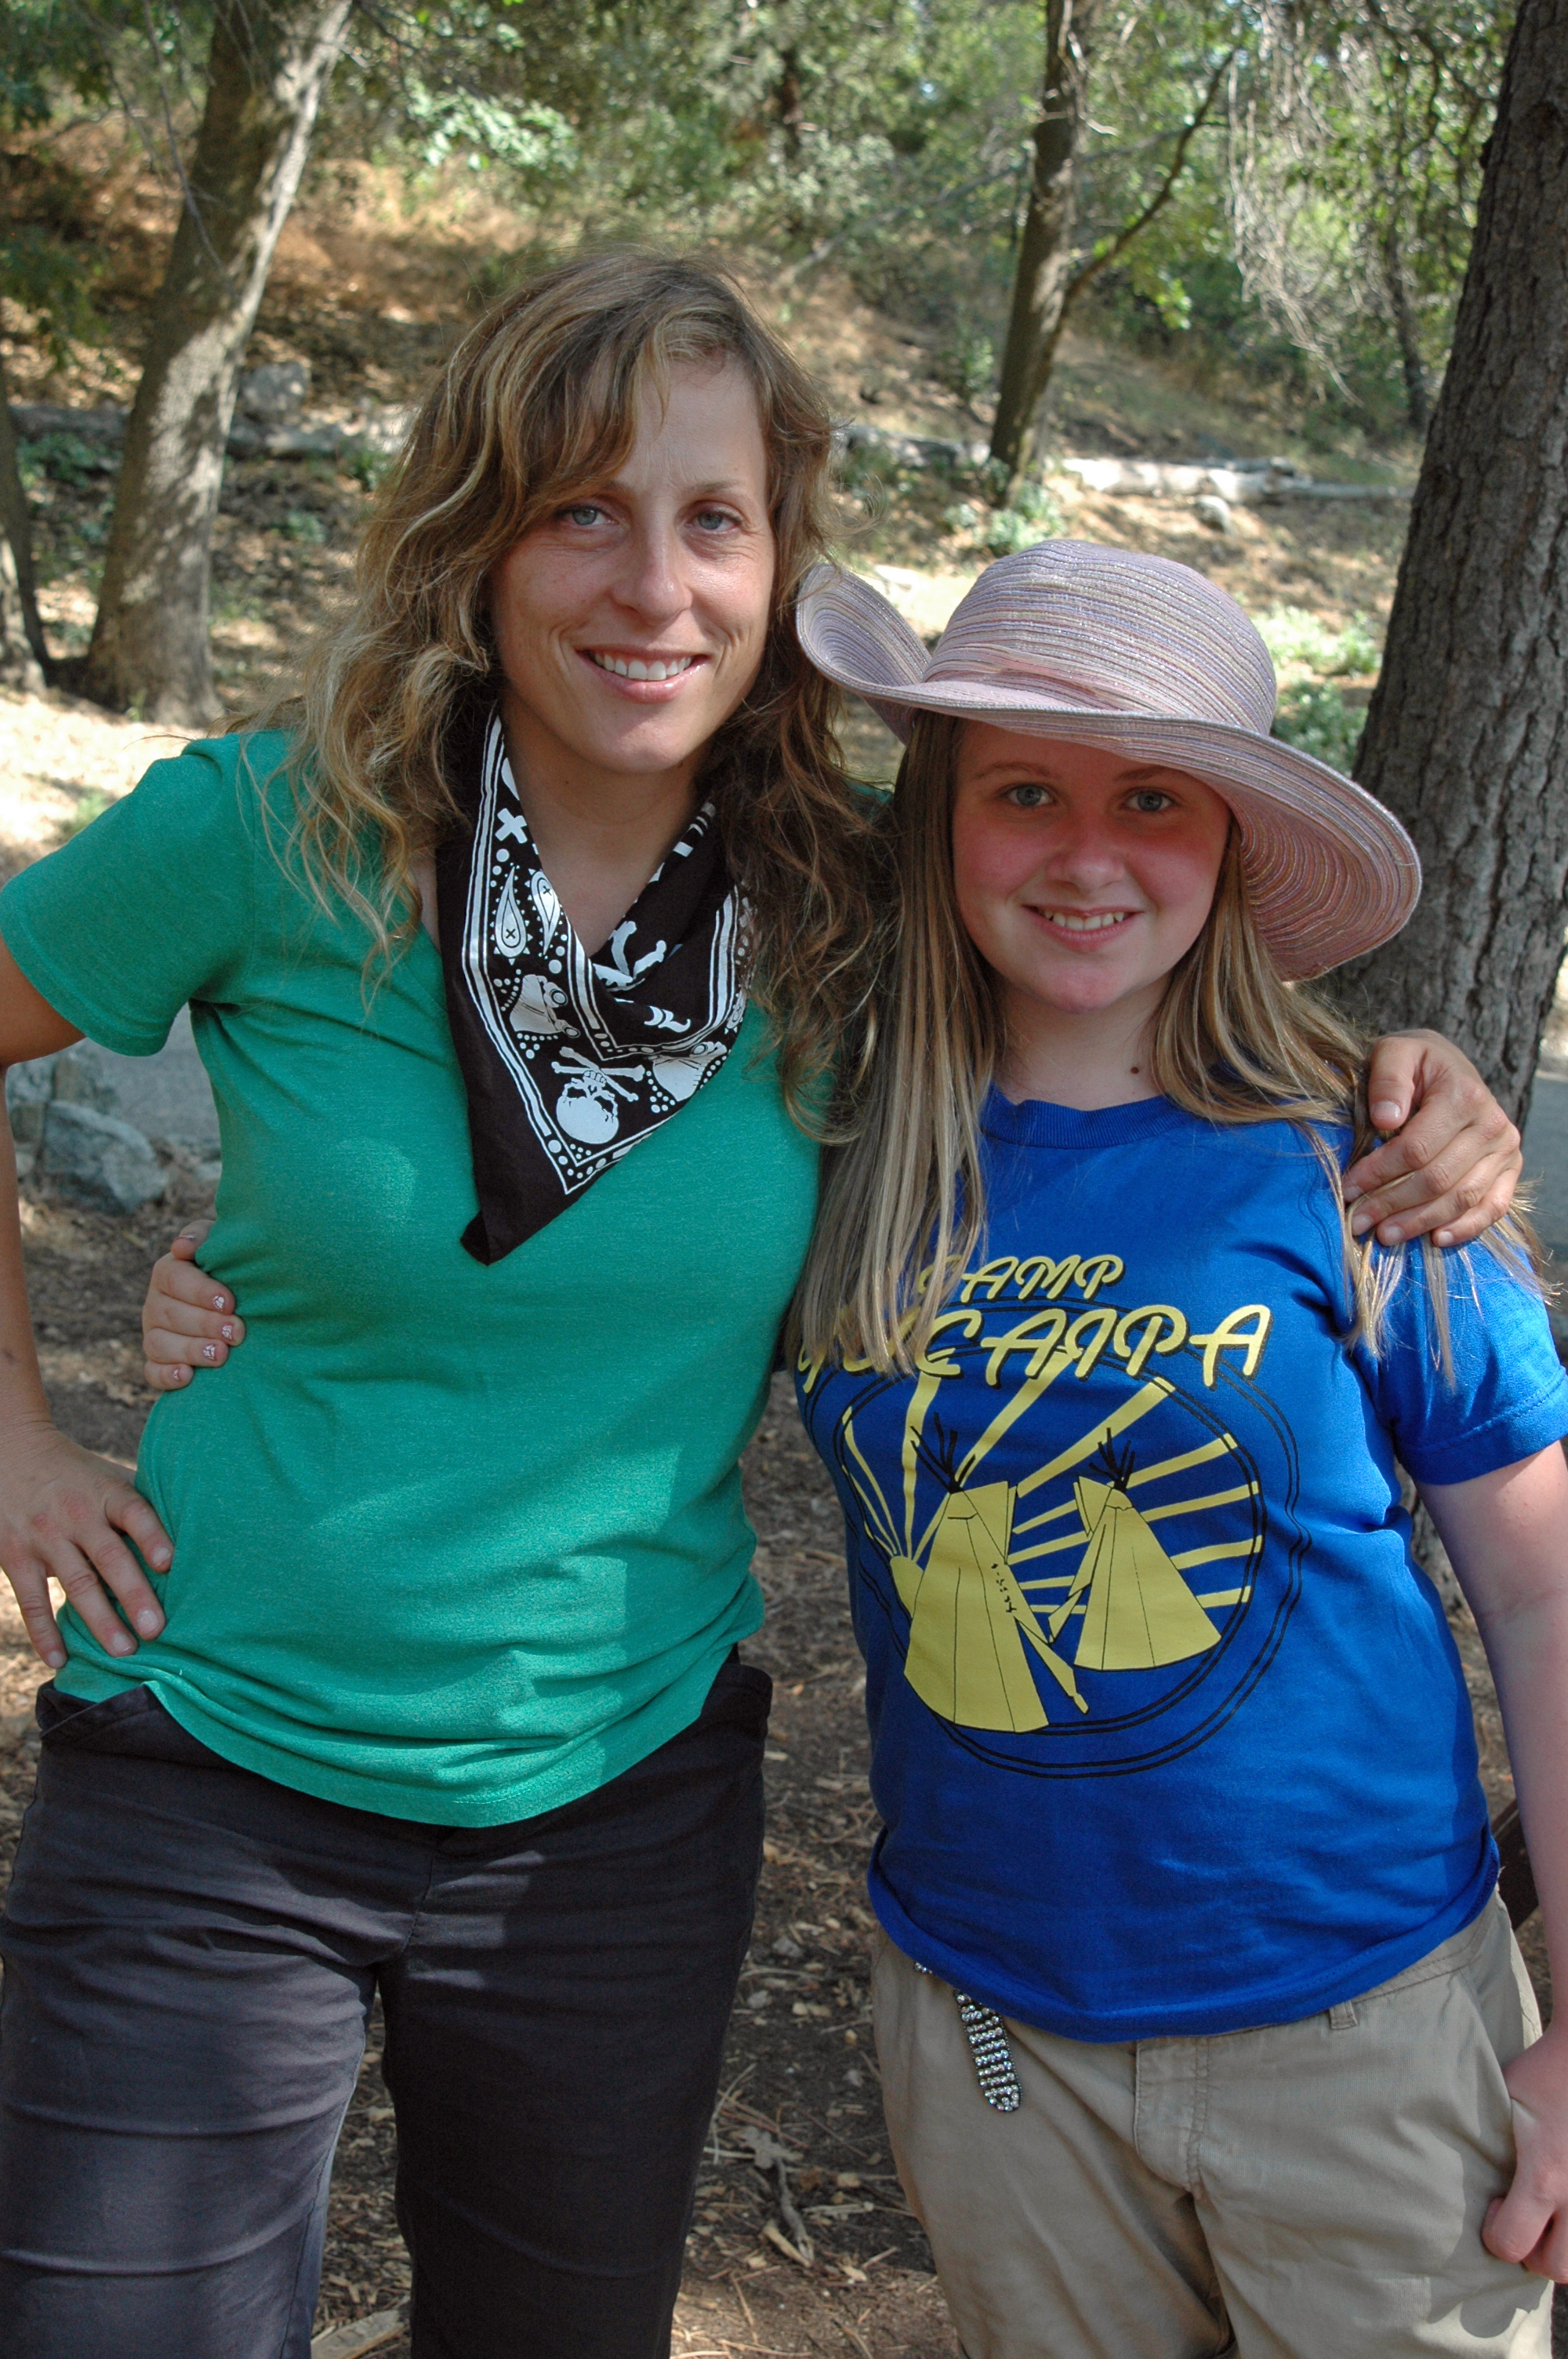 writer/director Janine Sides and Kaitlin Morgan on the set of Jody's Bra.